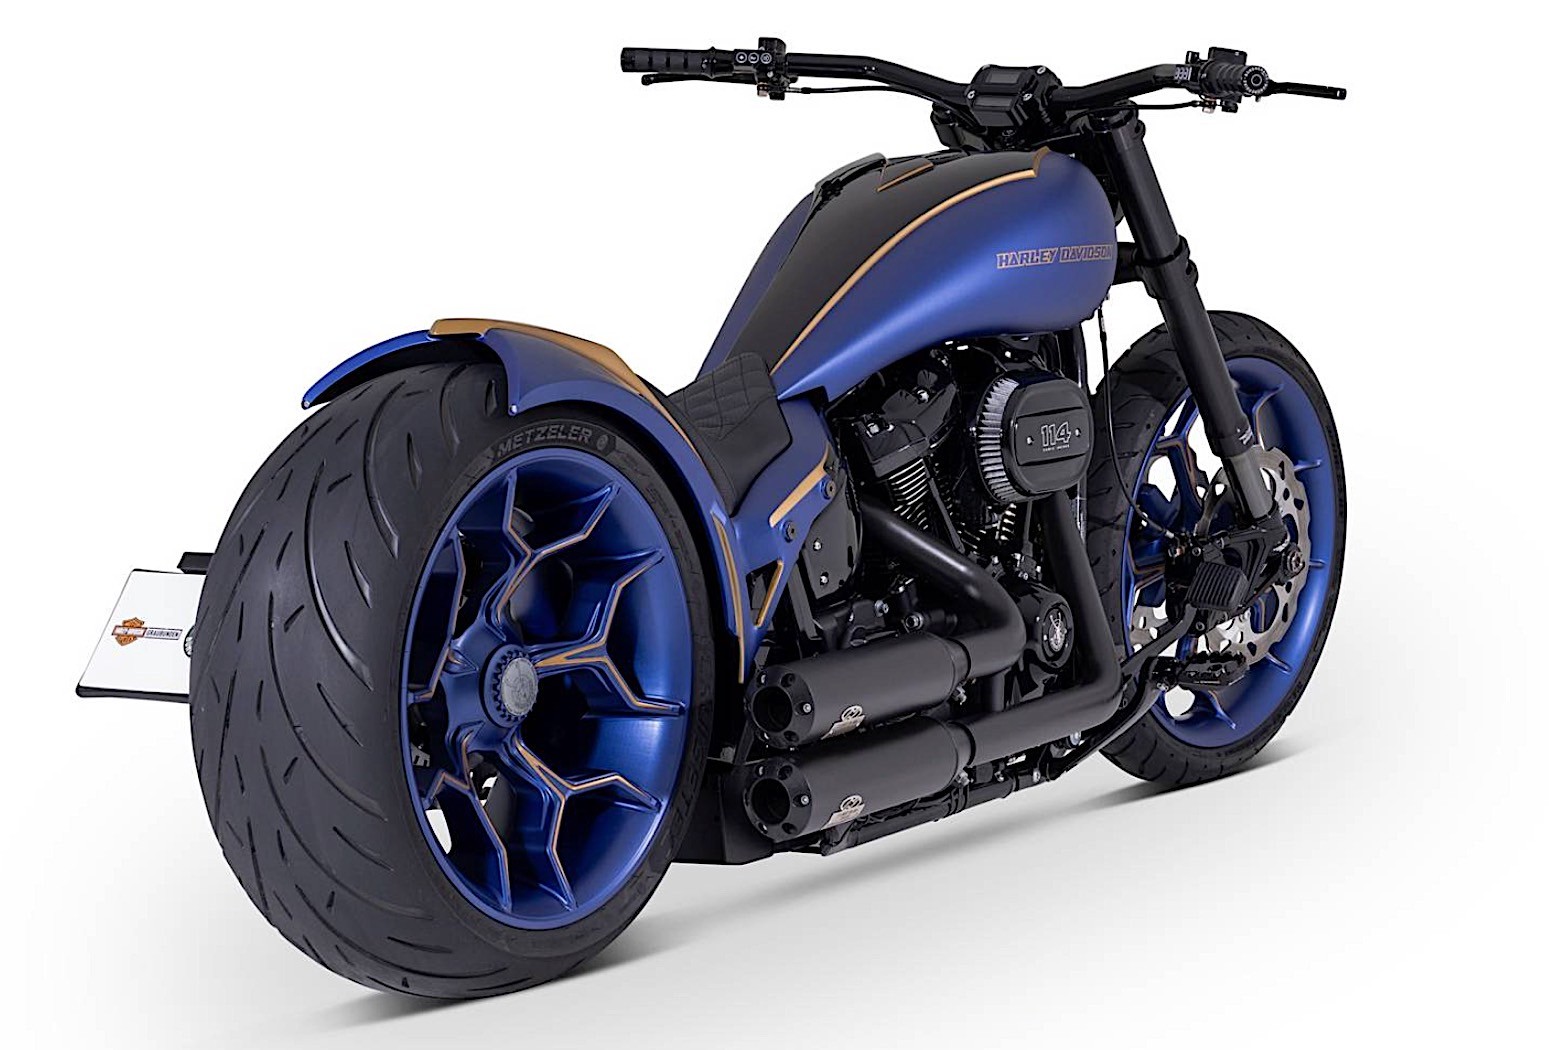 Customized Harley-Davidson motorcycles with Revolution engine by Thunderbike